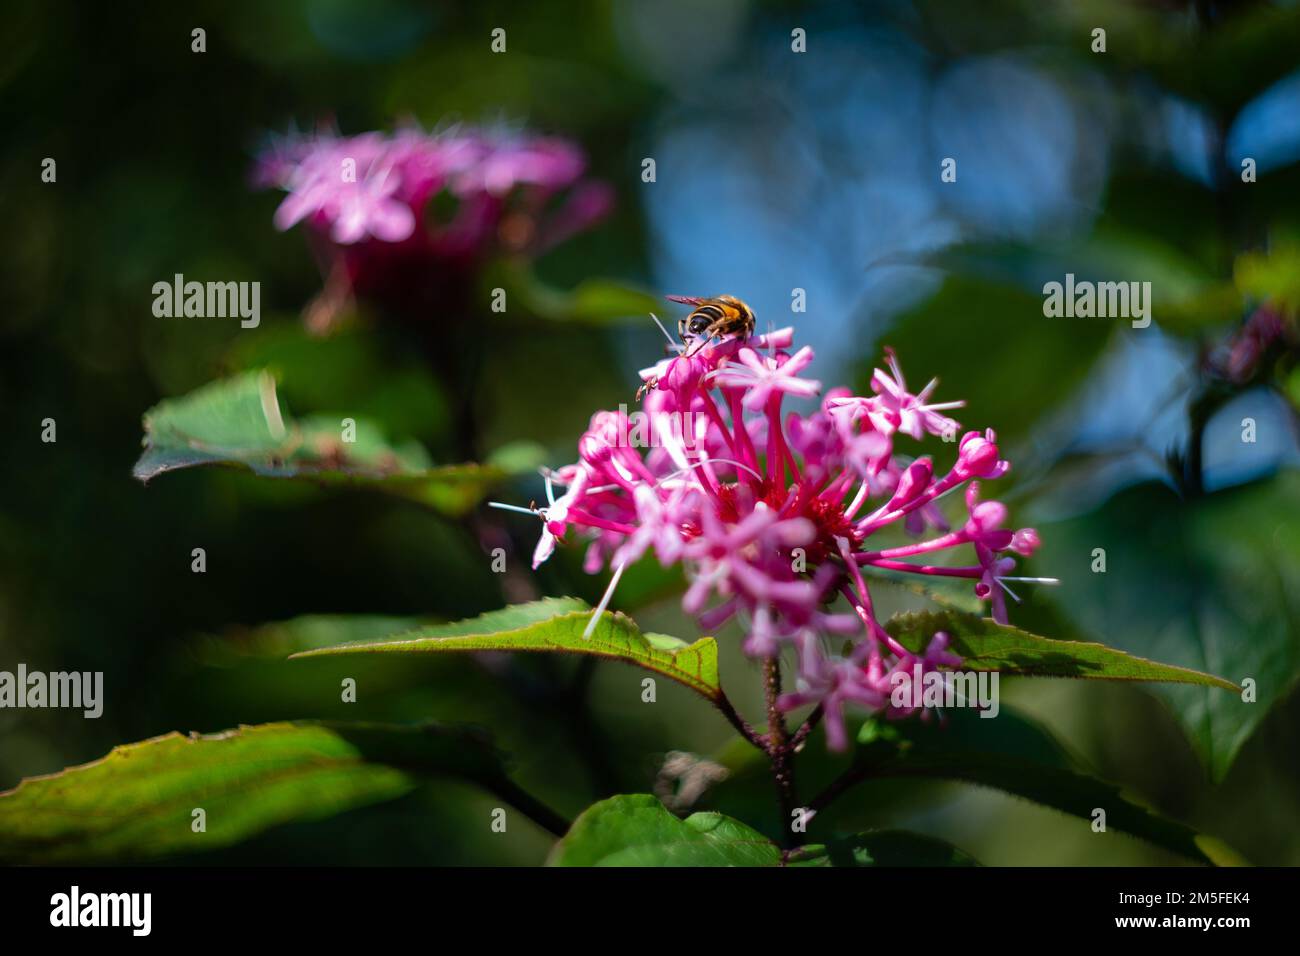 A closeup of Clerodendrum in garden with blurred background Stock Photo